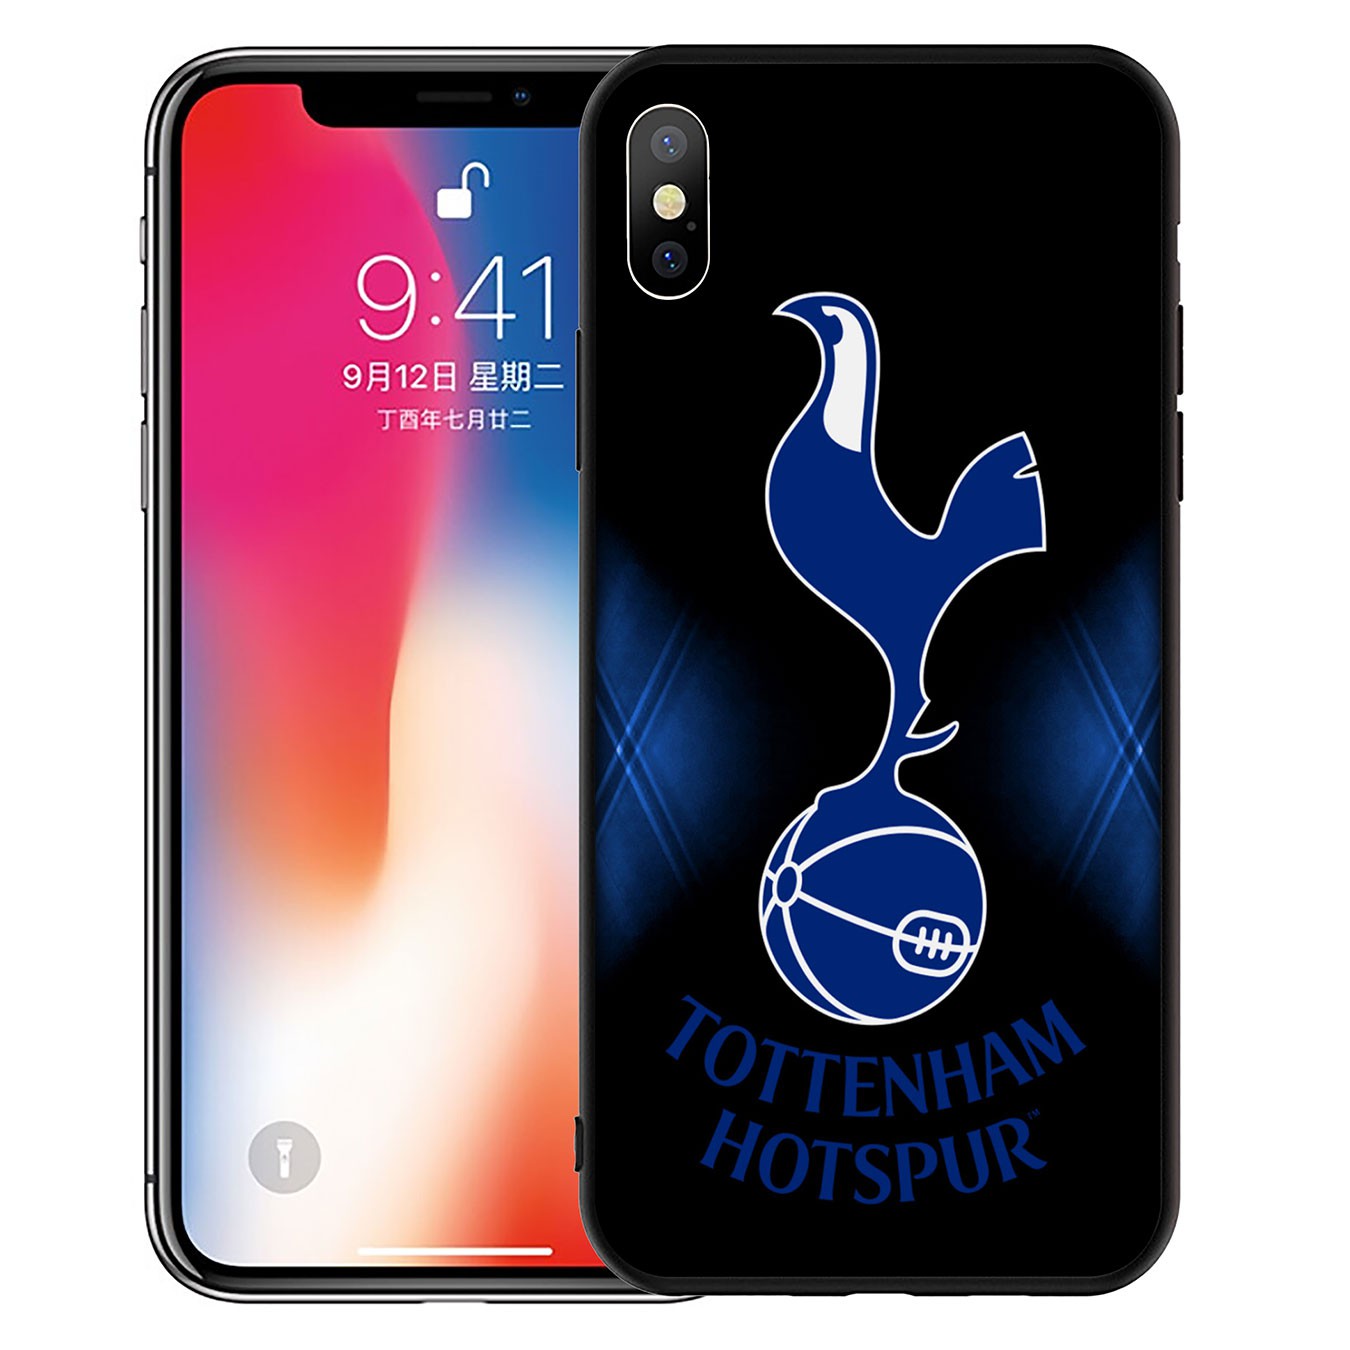 Samsung Galaxy S9 S10 S20 FE Ultra Plus Lite S20+ S9+ S10+ S20Plus Casing Soft Silicone Phone Case Tottenham Hotspur Football Cover